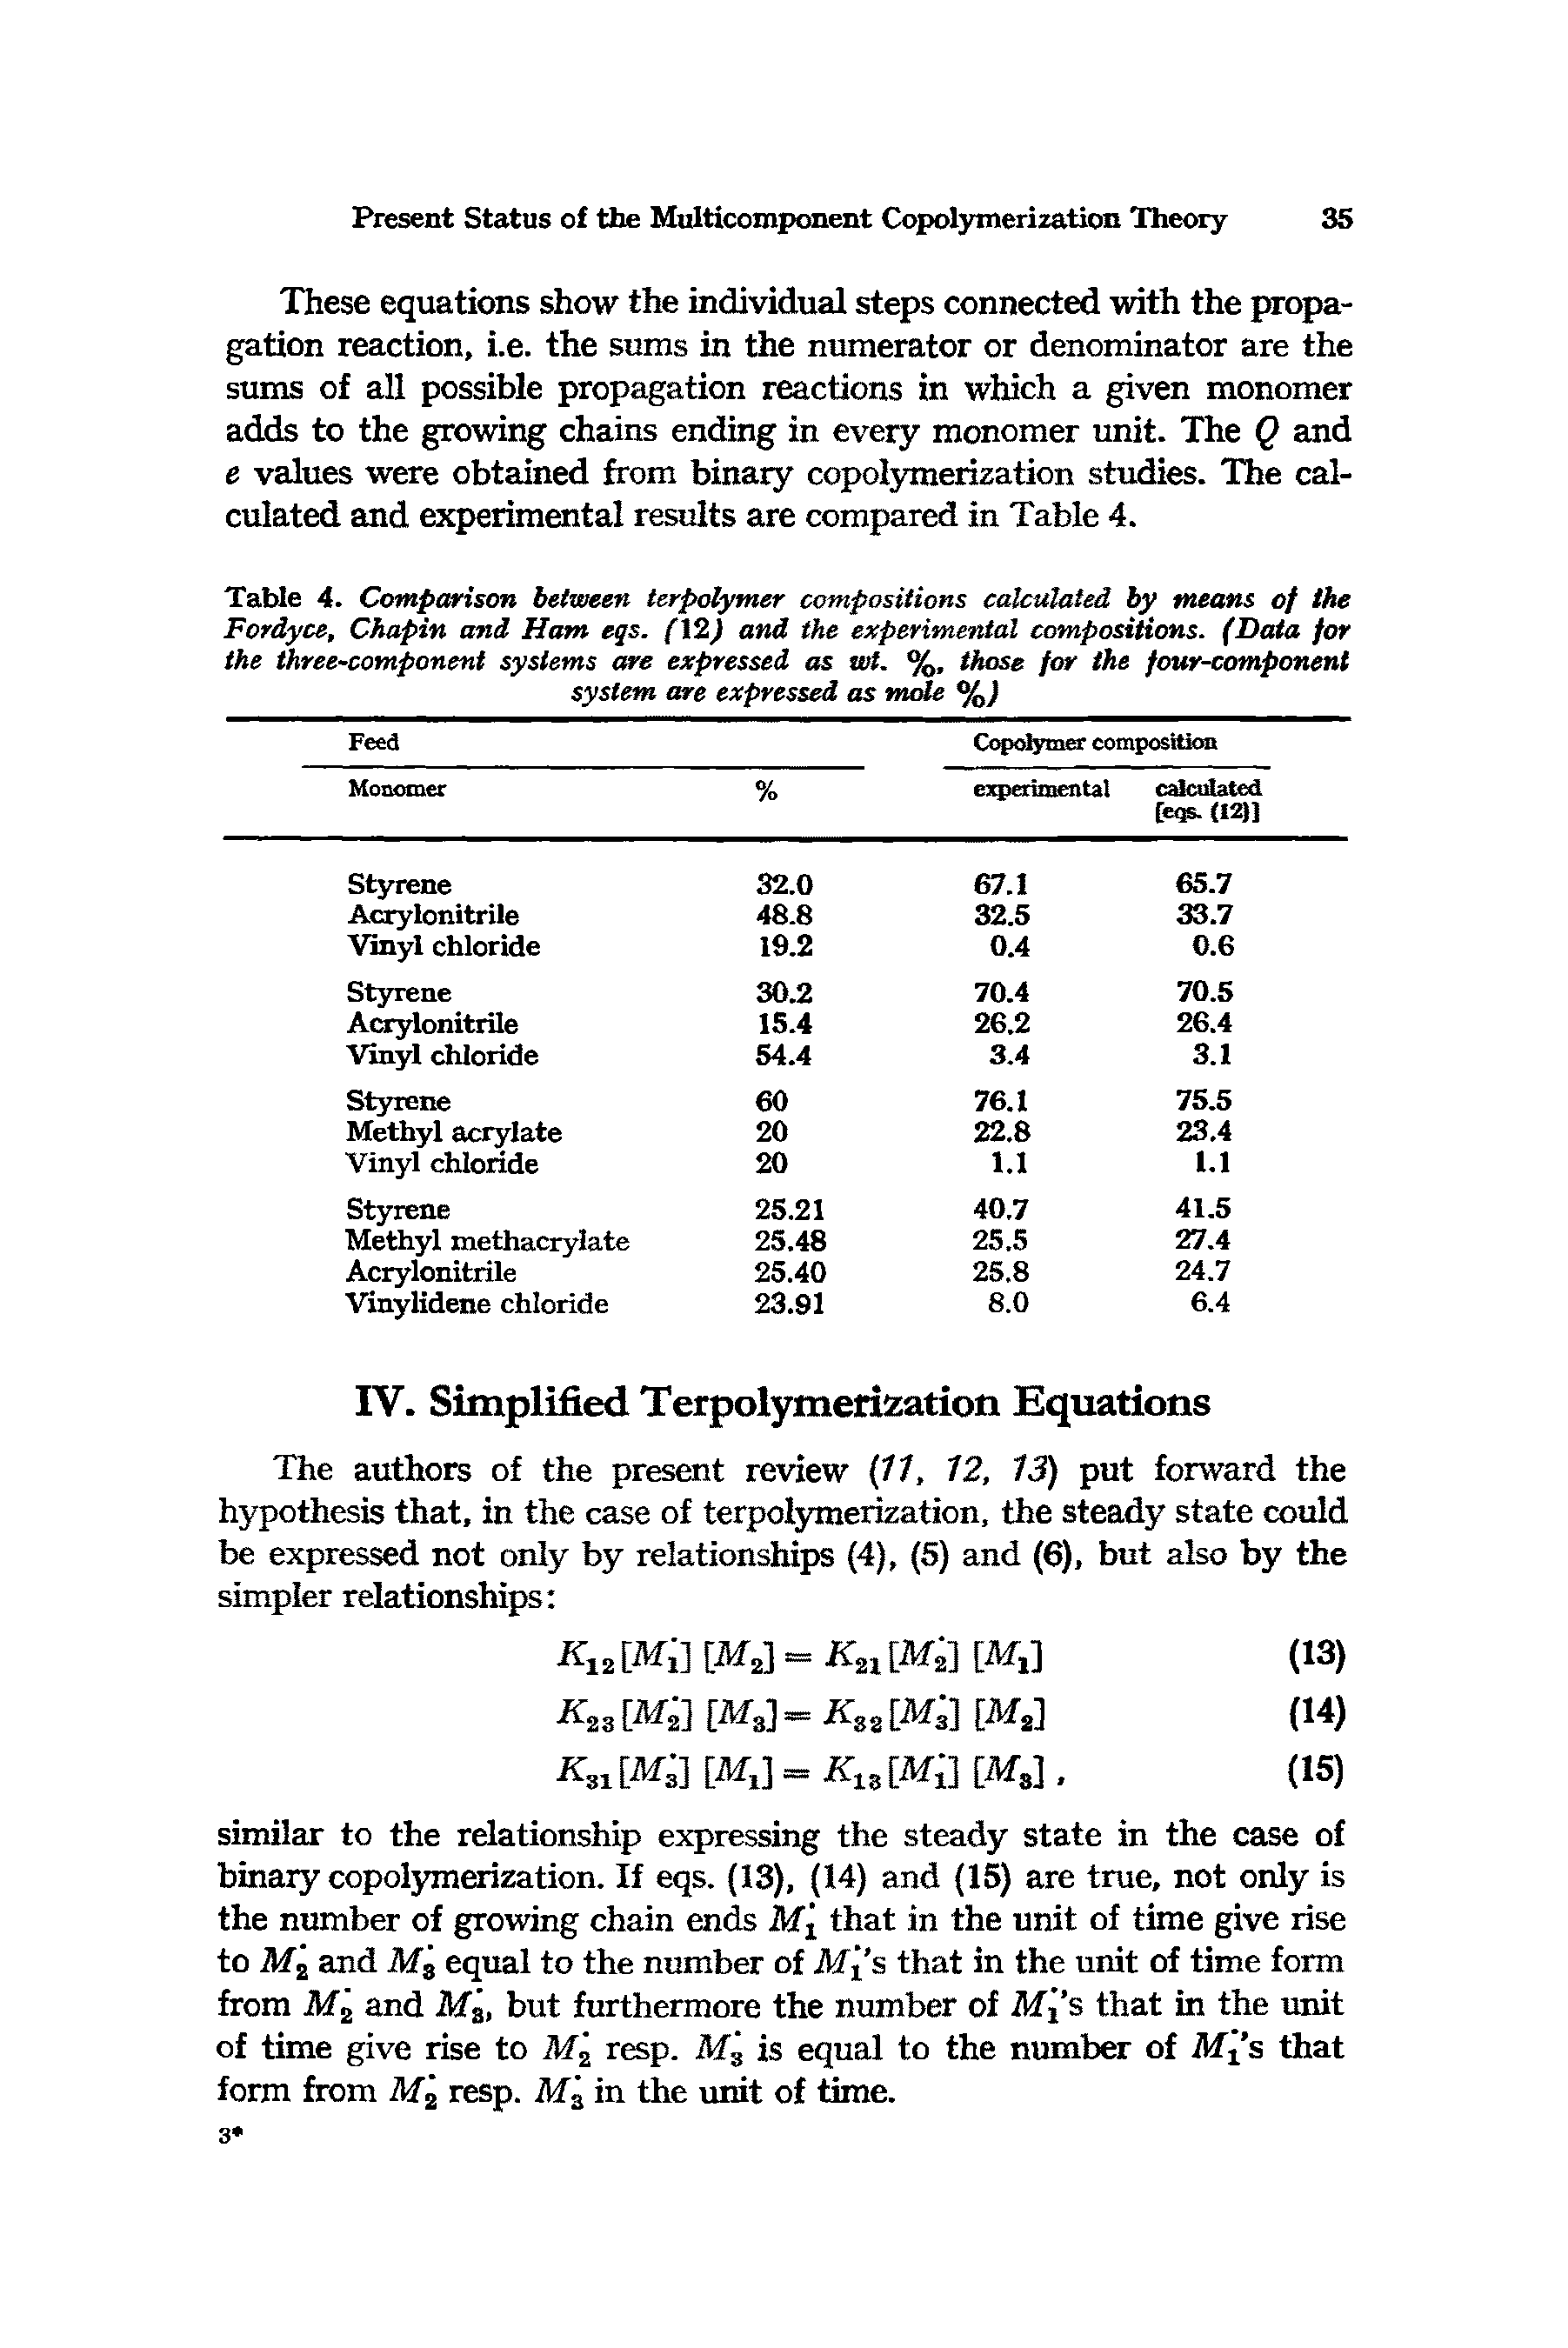 Table 4. Comparison between terpolymer compositions calculated by means of the Fordyce, Chapin and Ham eqs. fl2) and the experimental compositions. (Data for ike three-component systems are expressed as wt. %, those for the four-component system are expressed as nude %J...